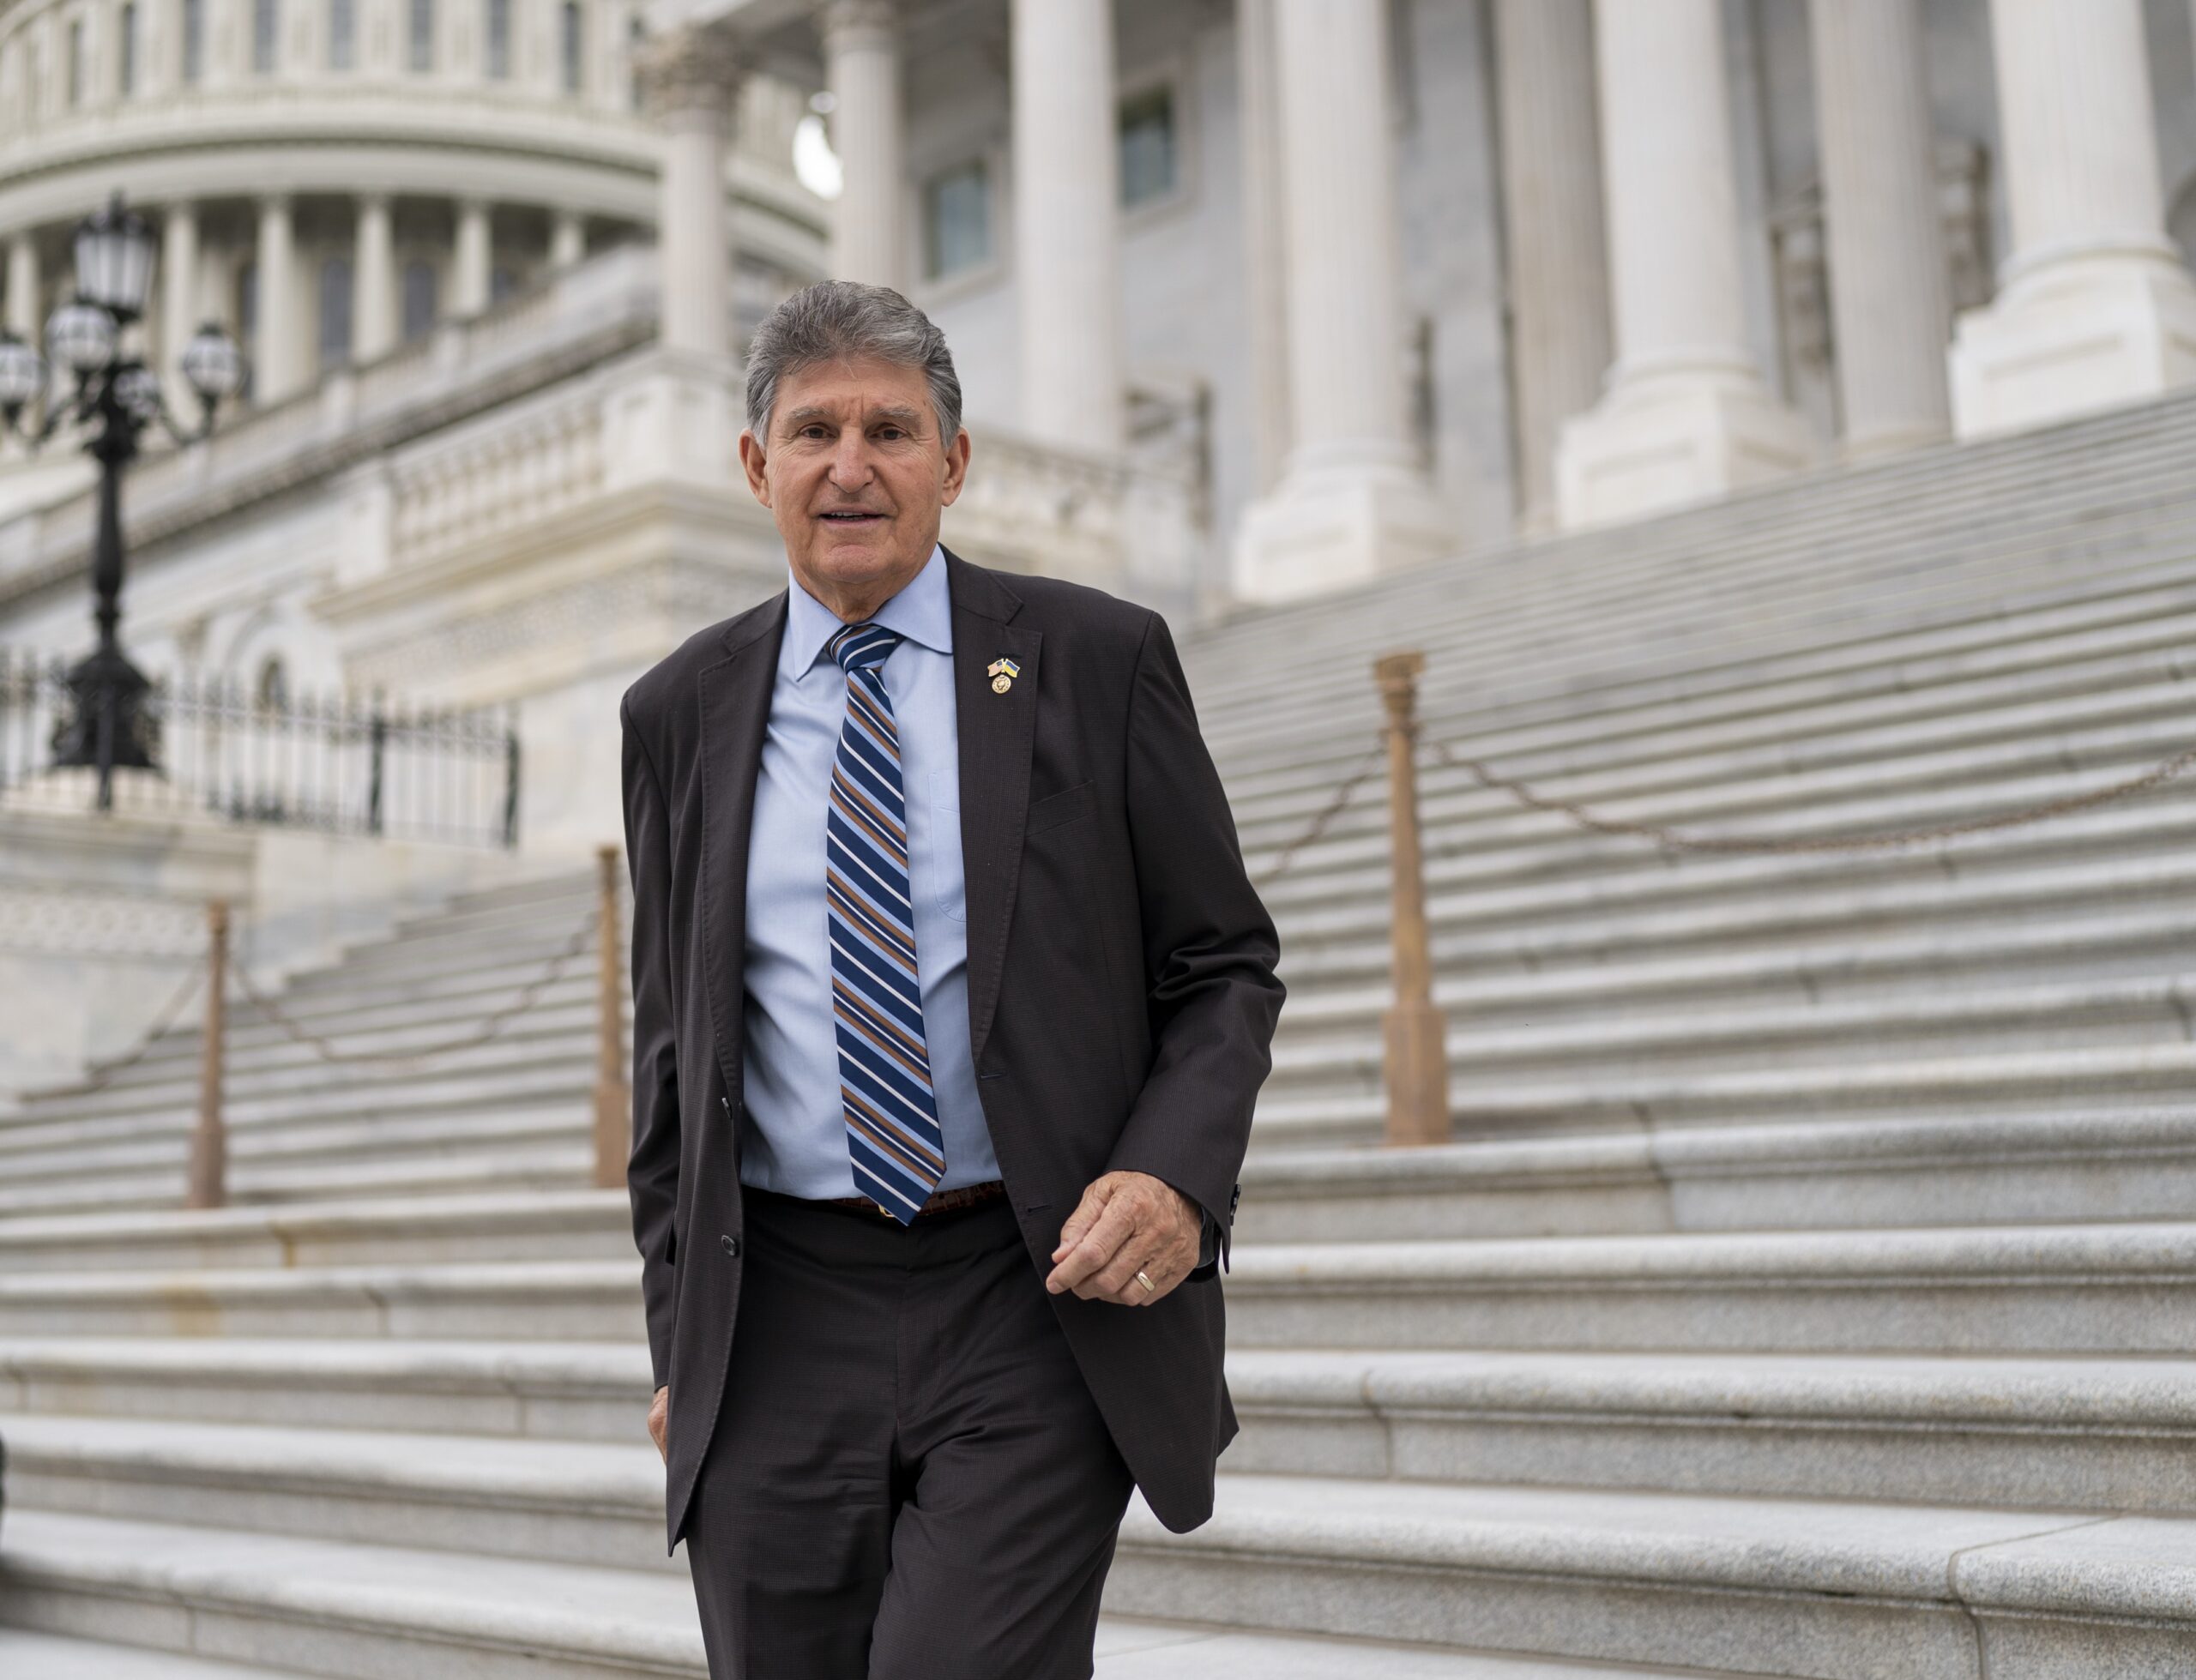 A take a look at Congressionally Directed Spending requests from Sen. Manchin